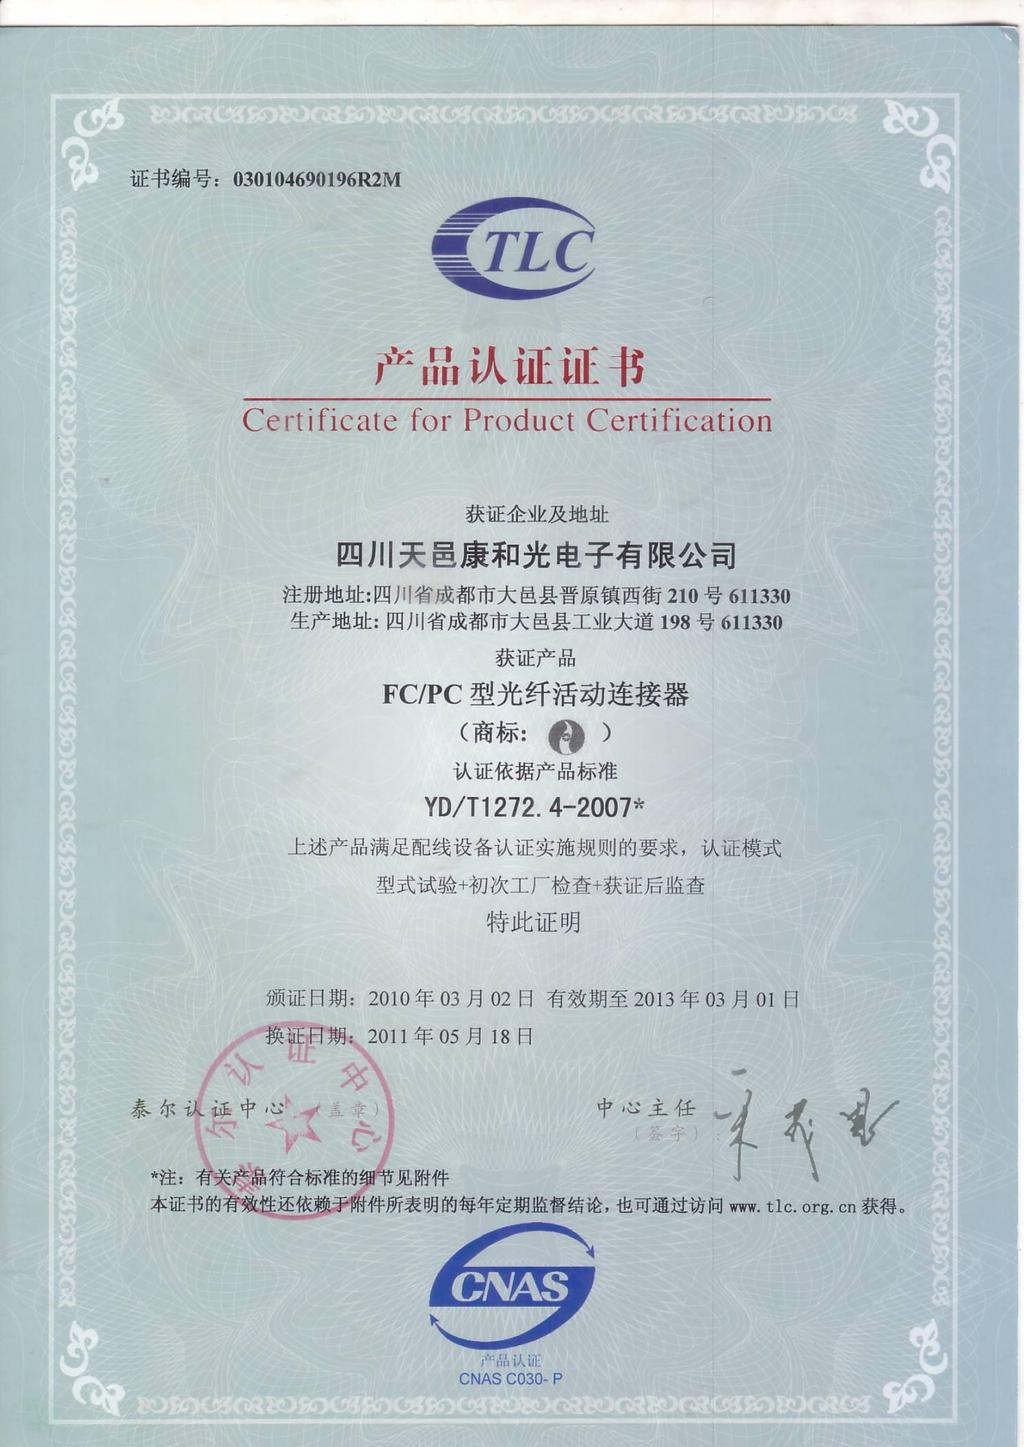 CERTIFICATE FOR